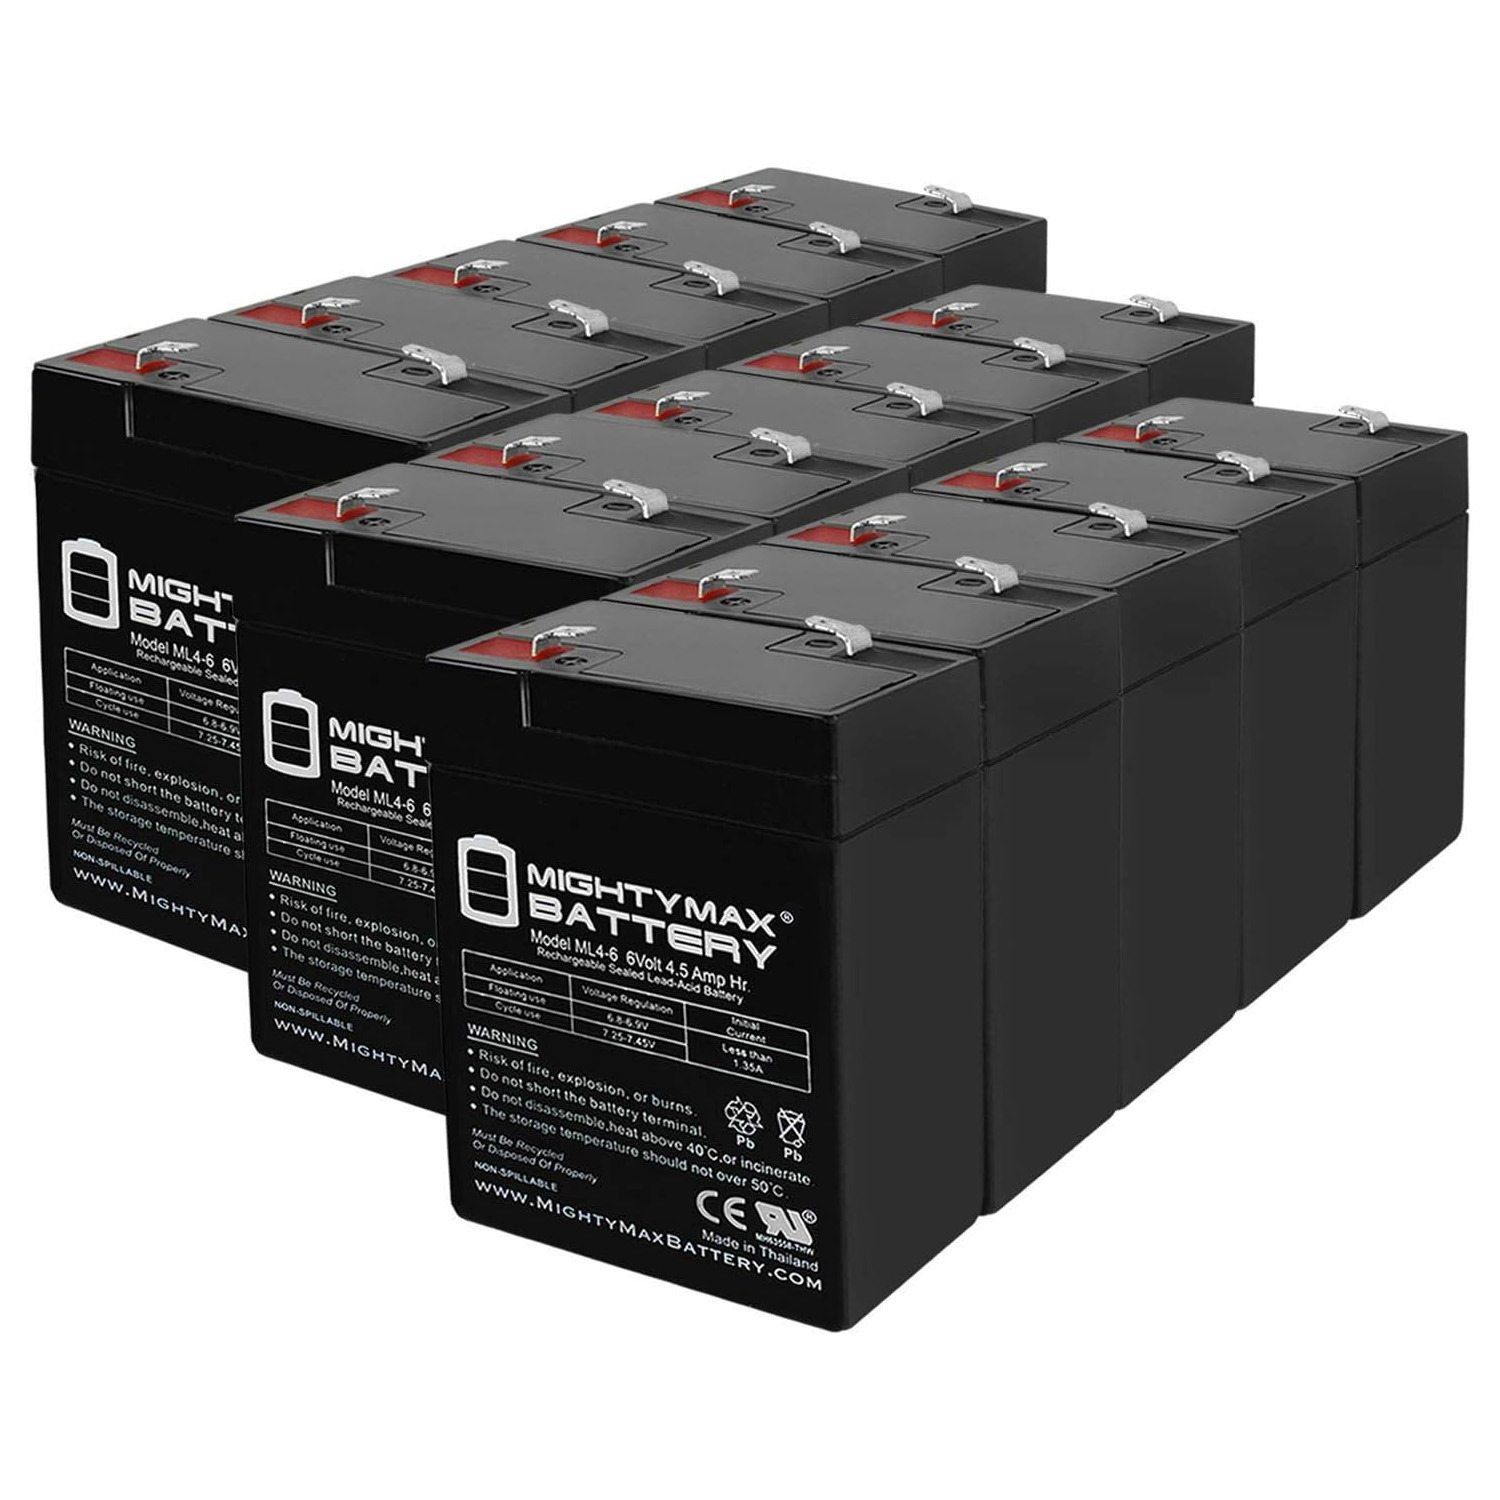 6V 4.5AH Replacement Battery for PCM AGM Powercom KOF-300S - 15 Pack